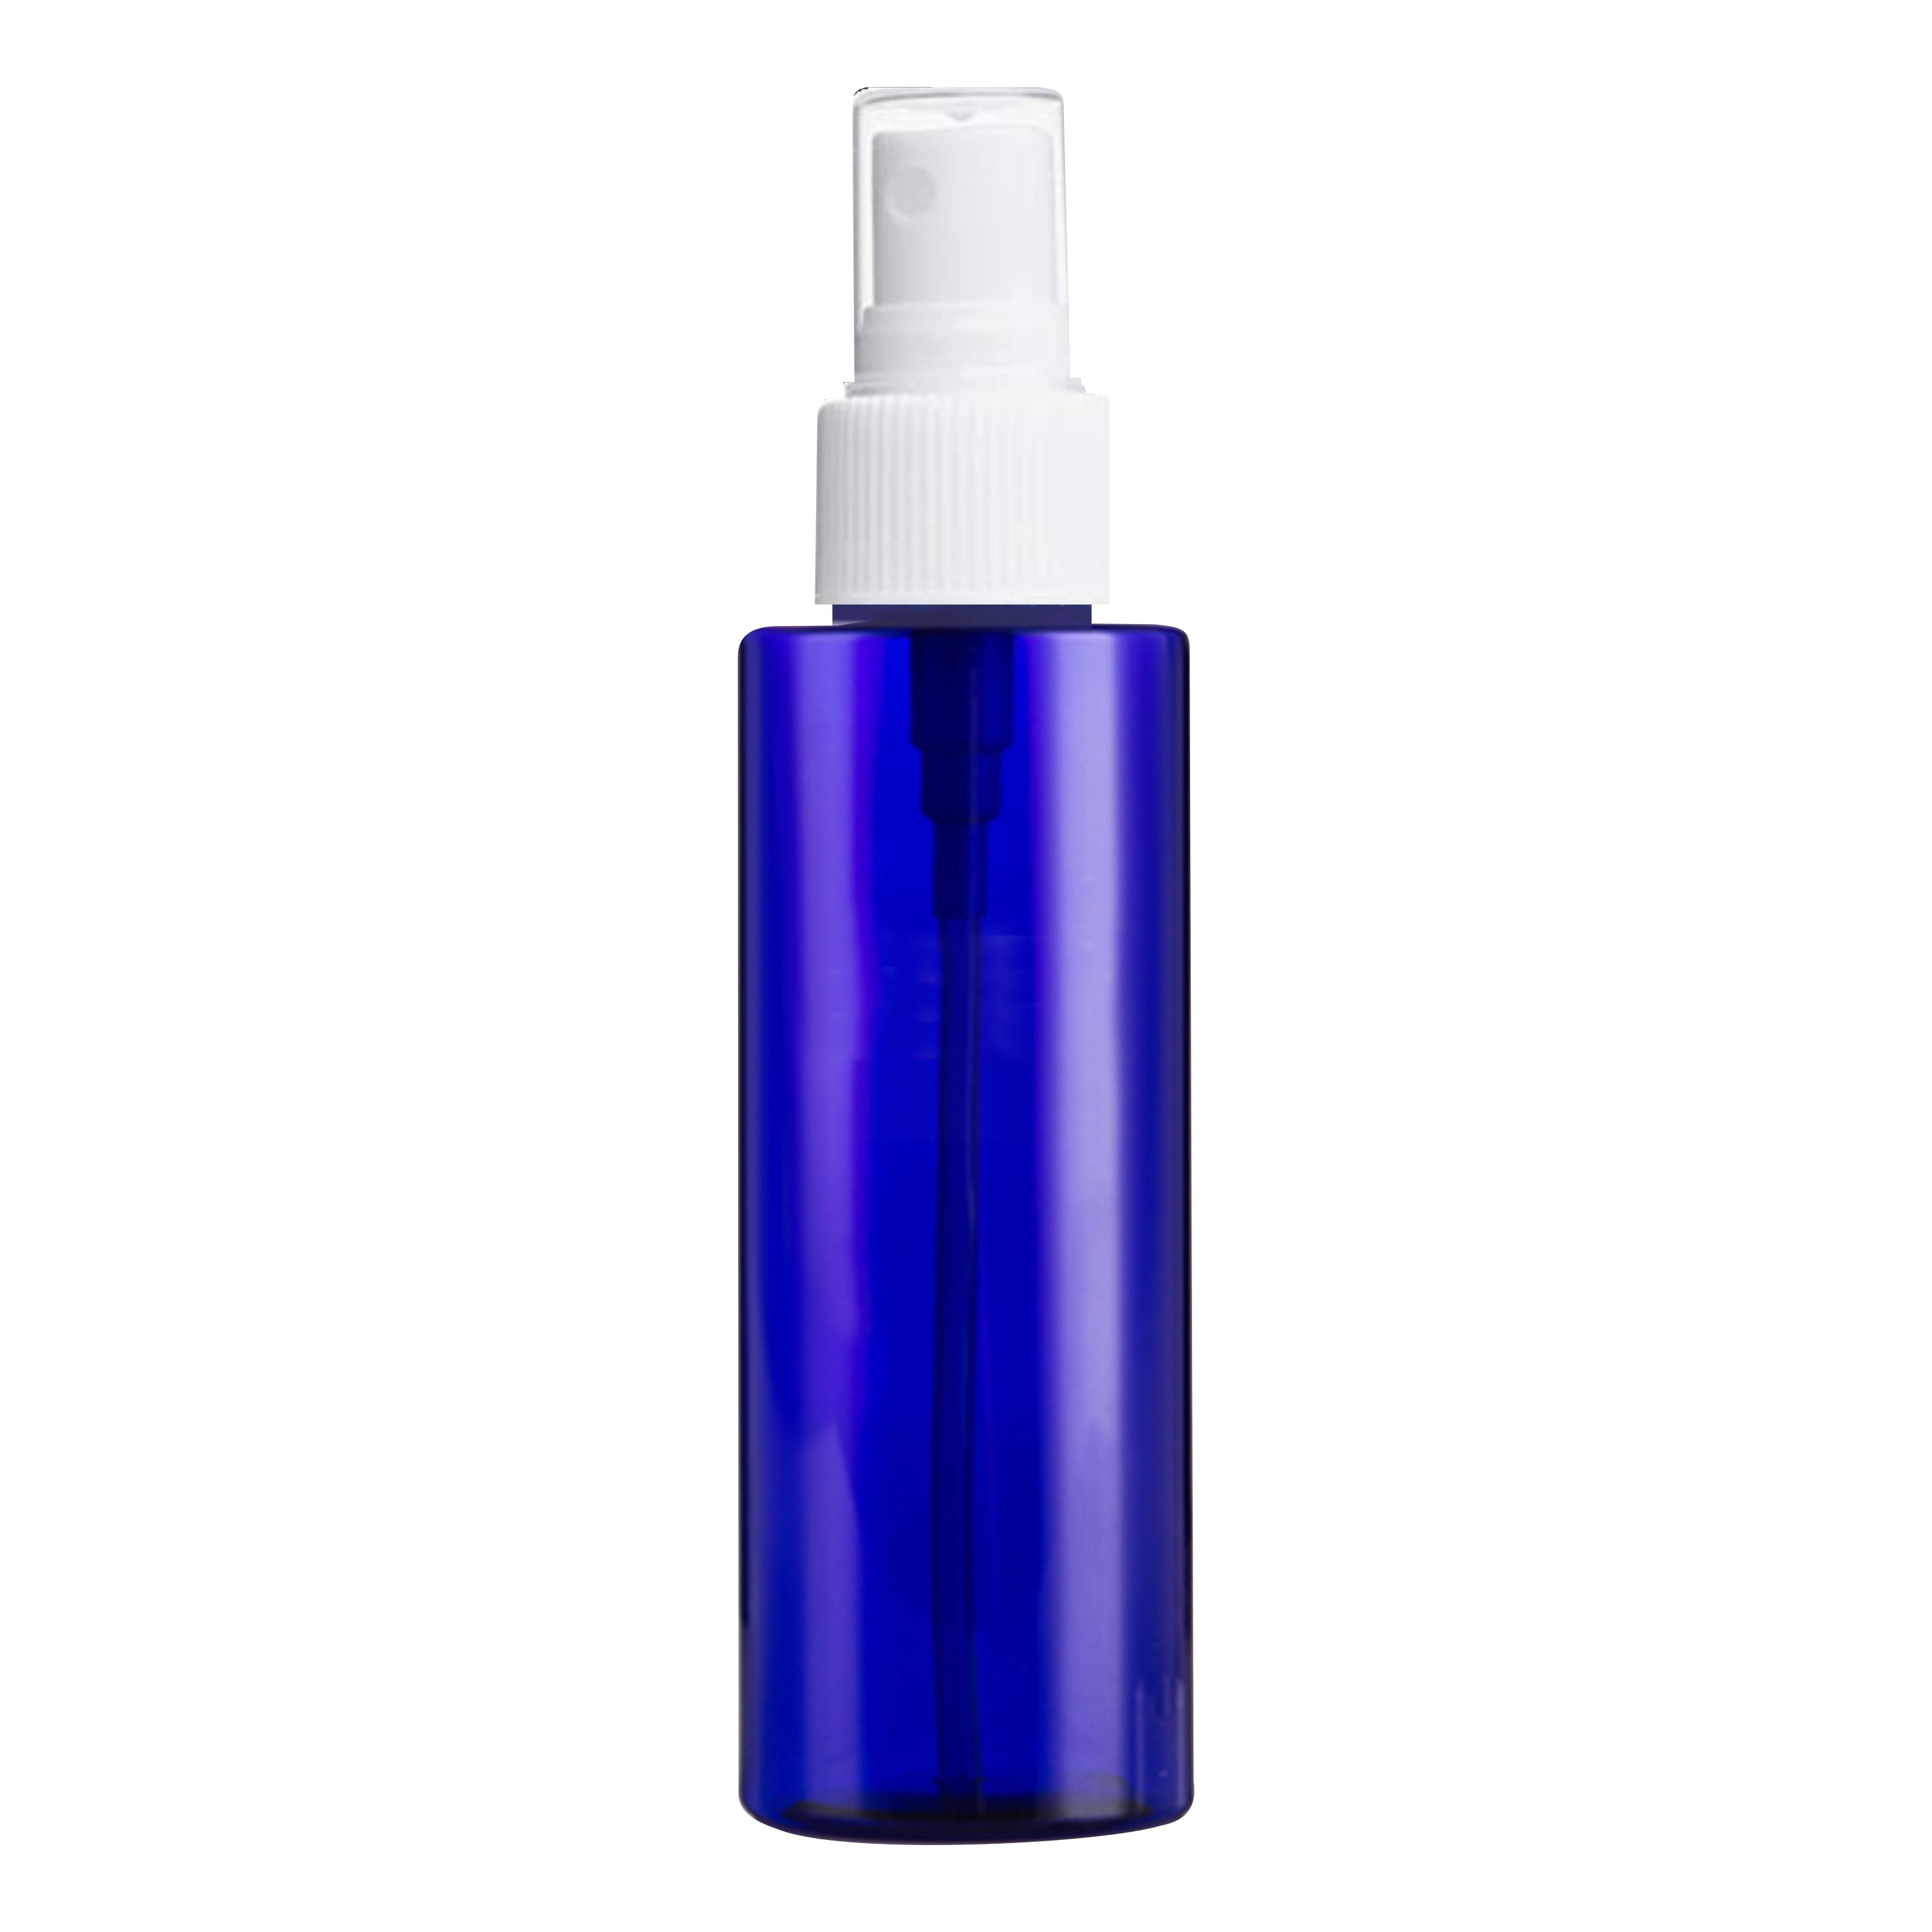 zenvista Empty Blue Color Cosmetic Bottle with White Mist Spray Pump, Transparent Packaging Bottles For Perfumes, Sanitizers, Cosmetic Packaging , blue bottles , empty blue bottles , 100 ml blue color empty bottles , empty blue bottles for packagings , premium blue color bottles , empty bottles 100 ml blue color , blue color cosmetic bottles